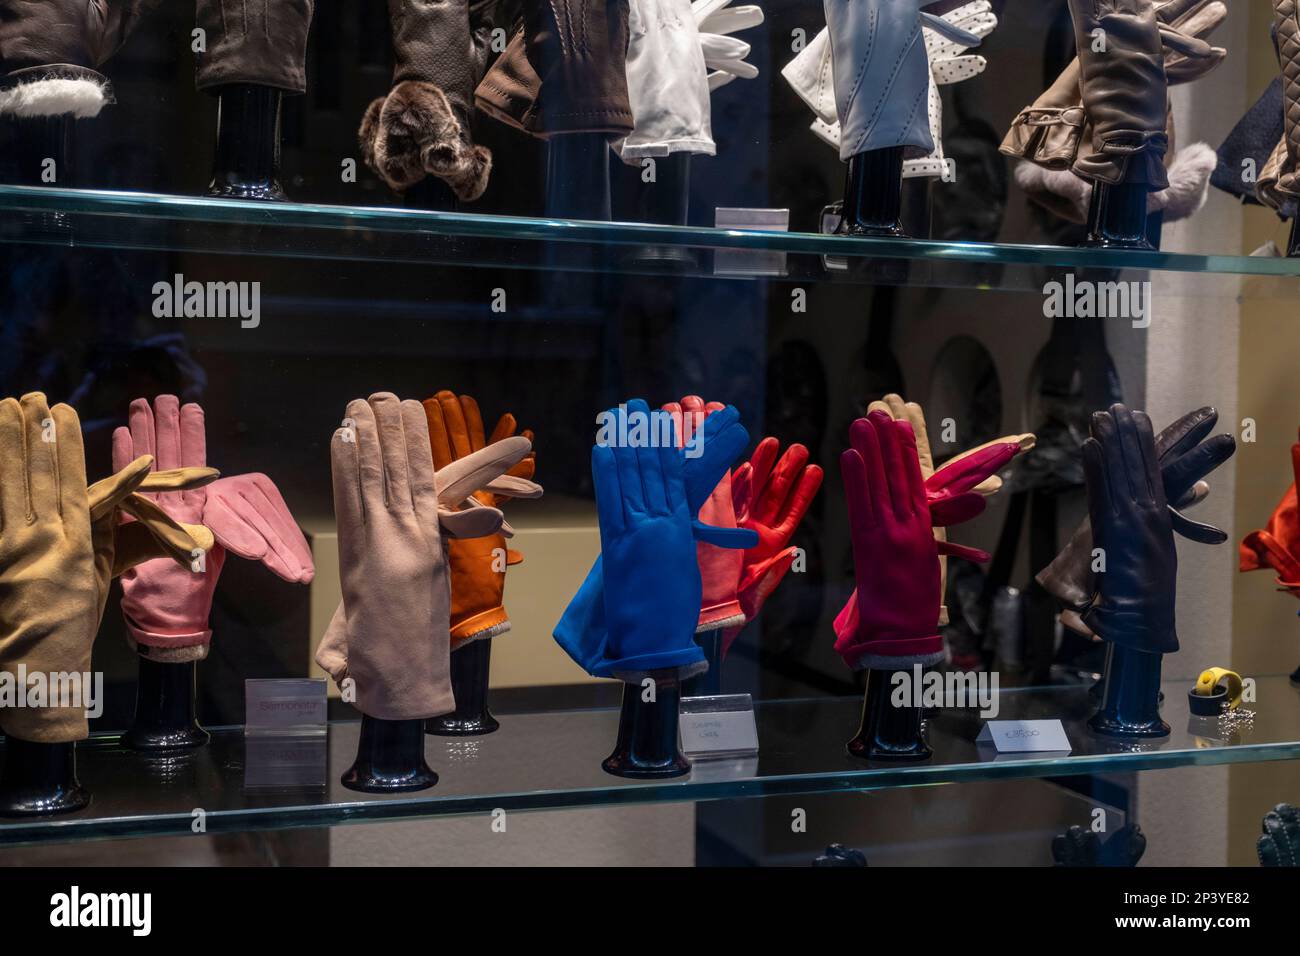 Leather gloves in a shop window, Venice, italy Stock Photo